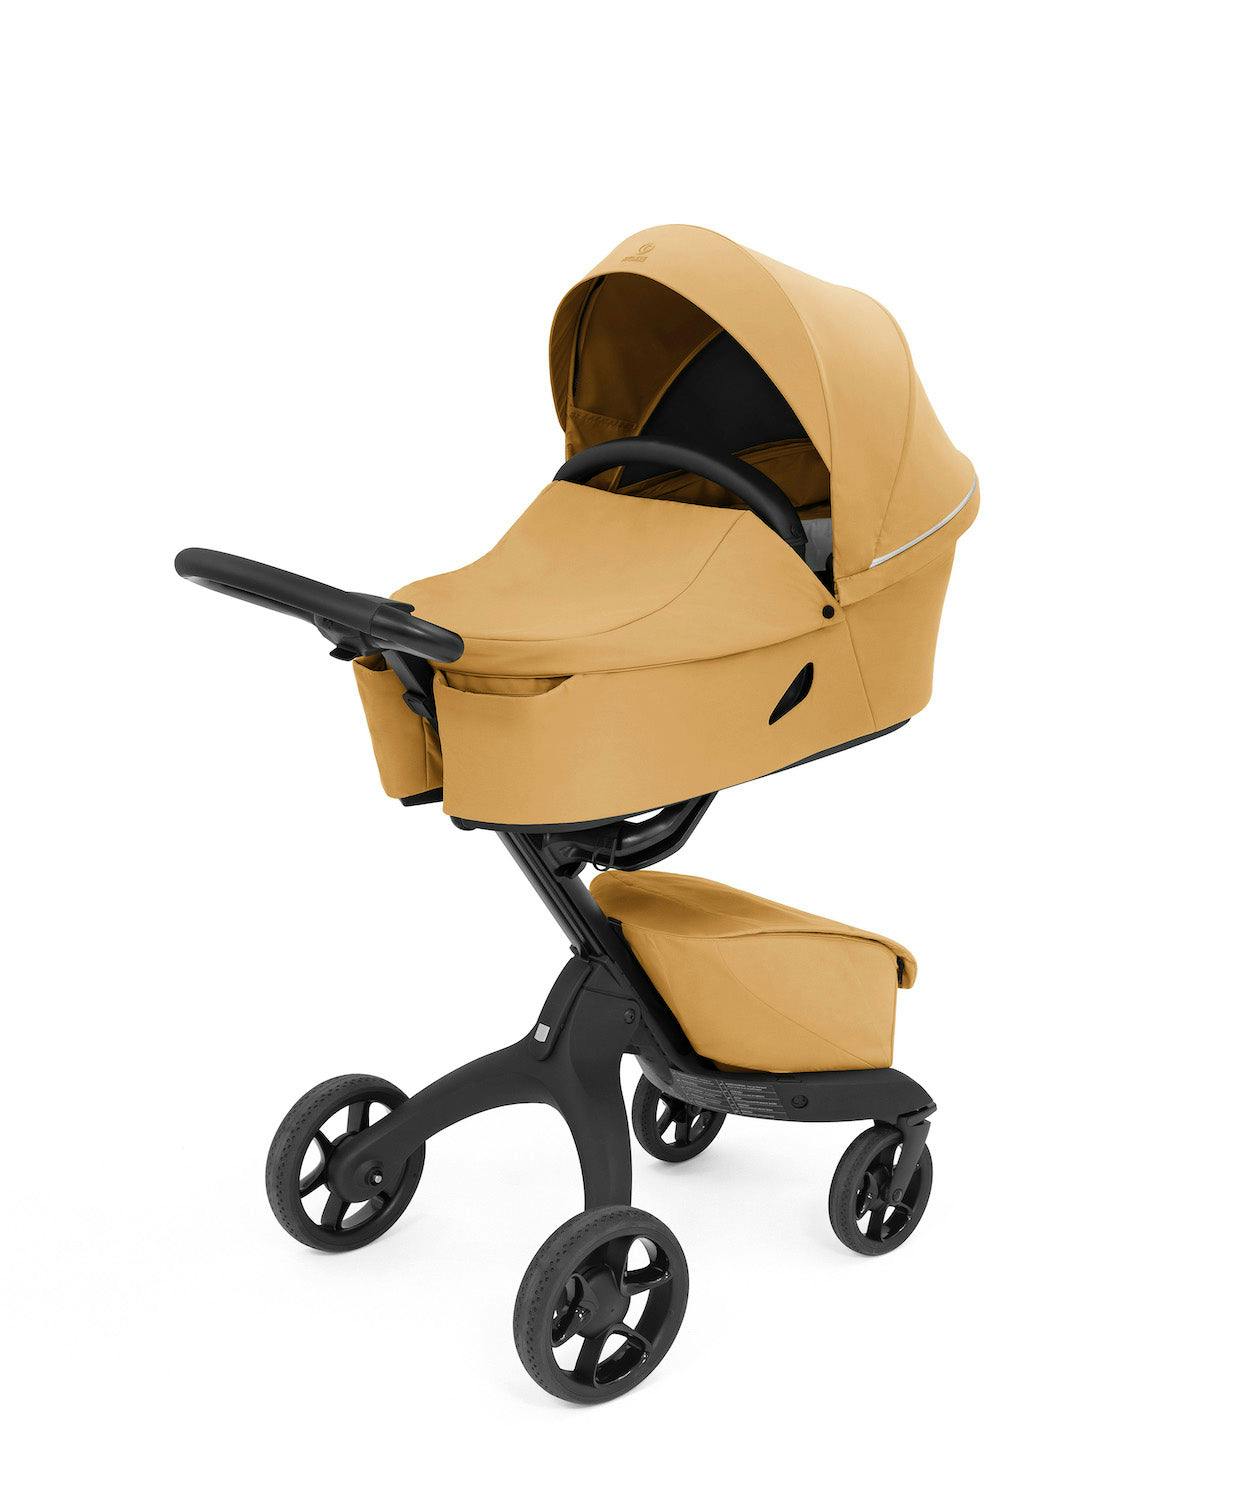 Stokke Xplory X Stroller Carry Cot · Golden Yellow